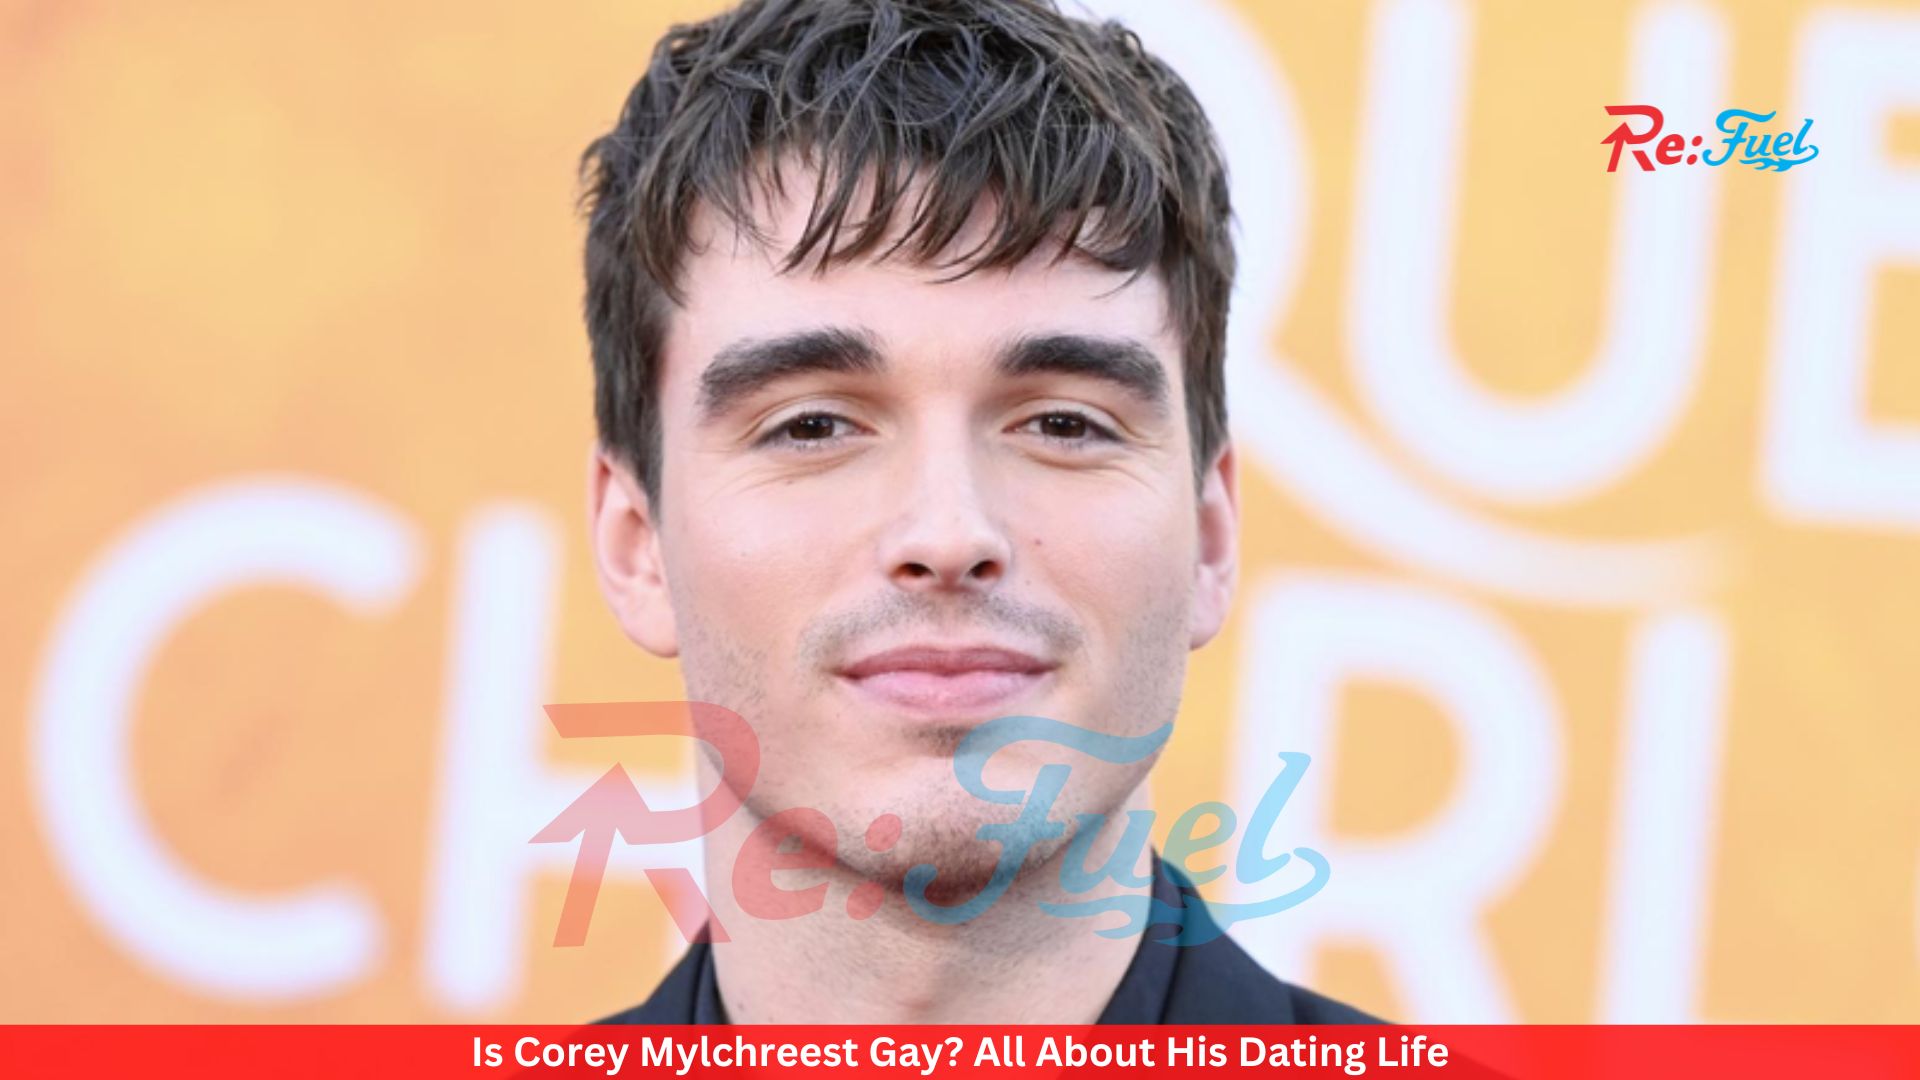 Is Corey Mylchreest Gay? All About His Dating Life